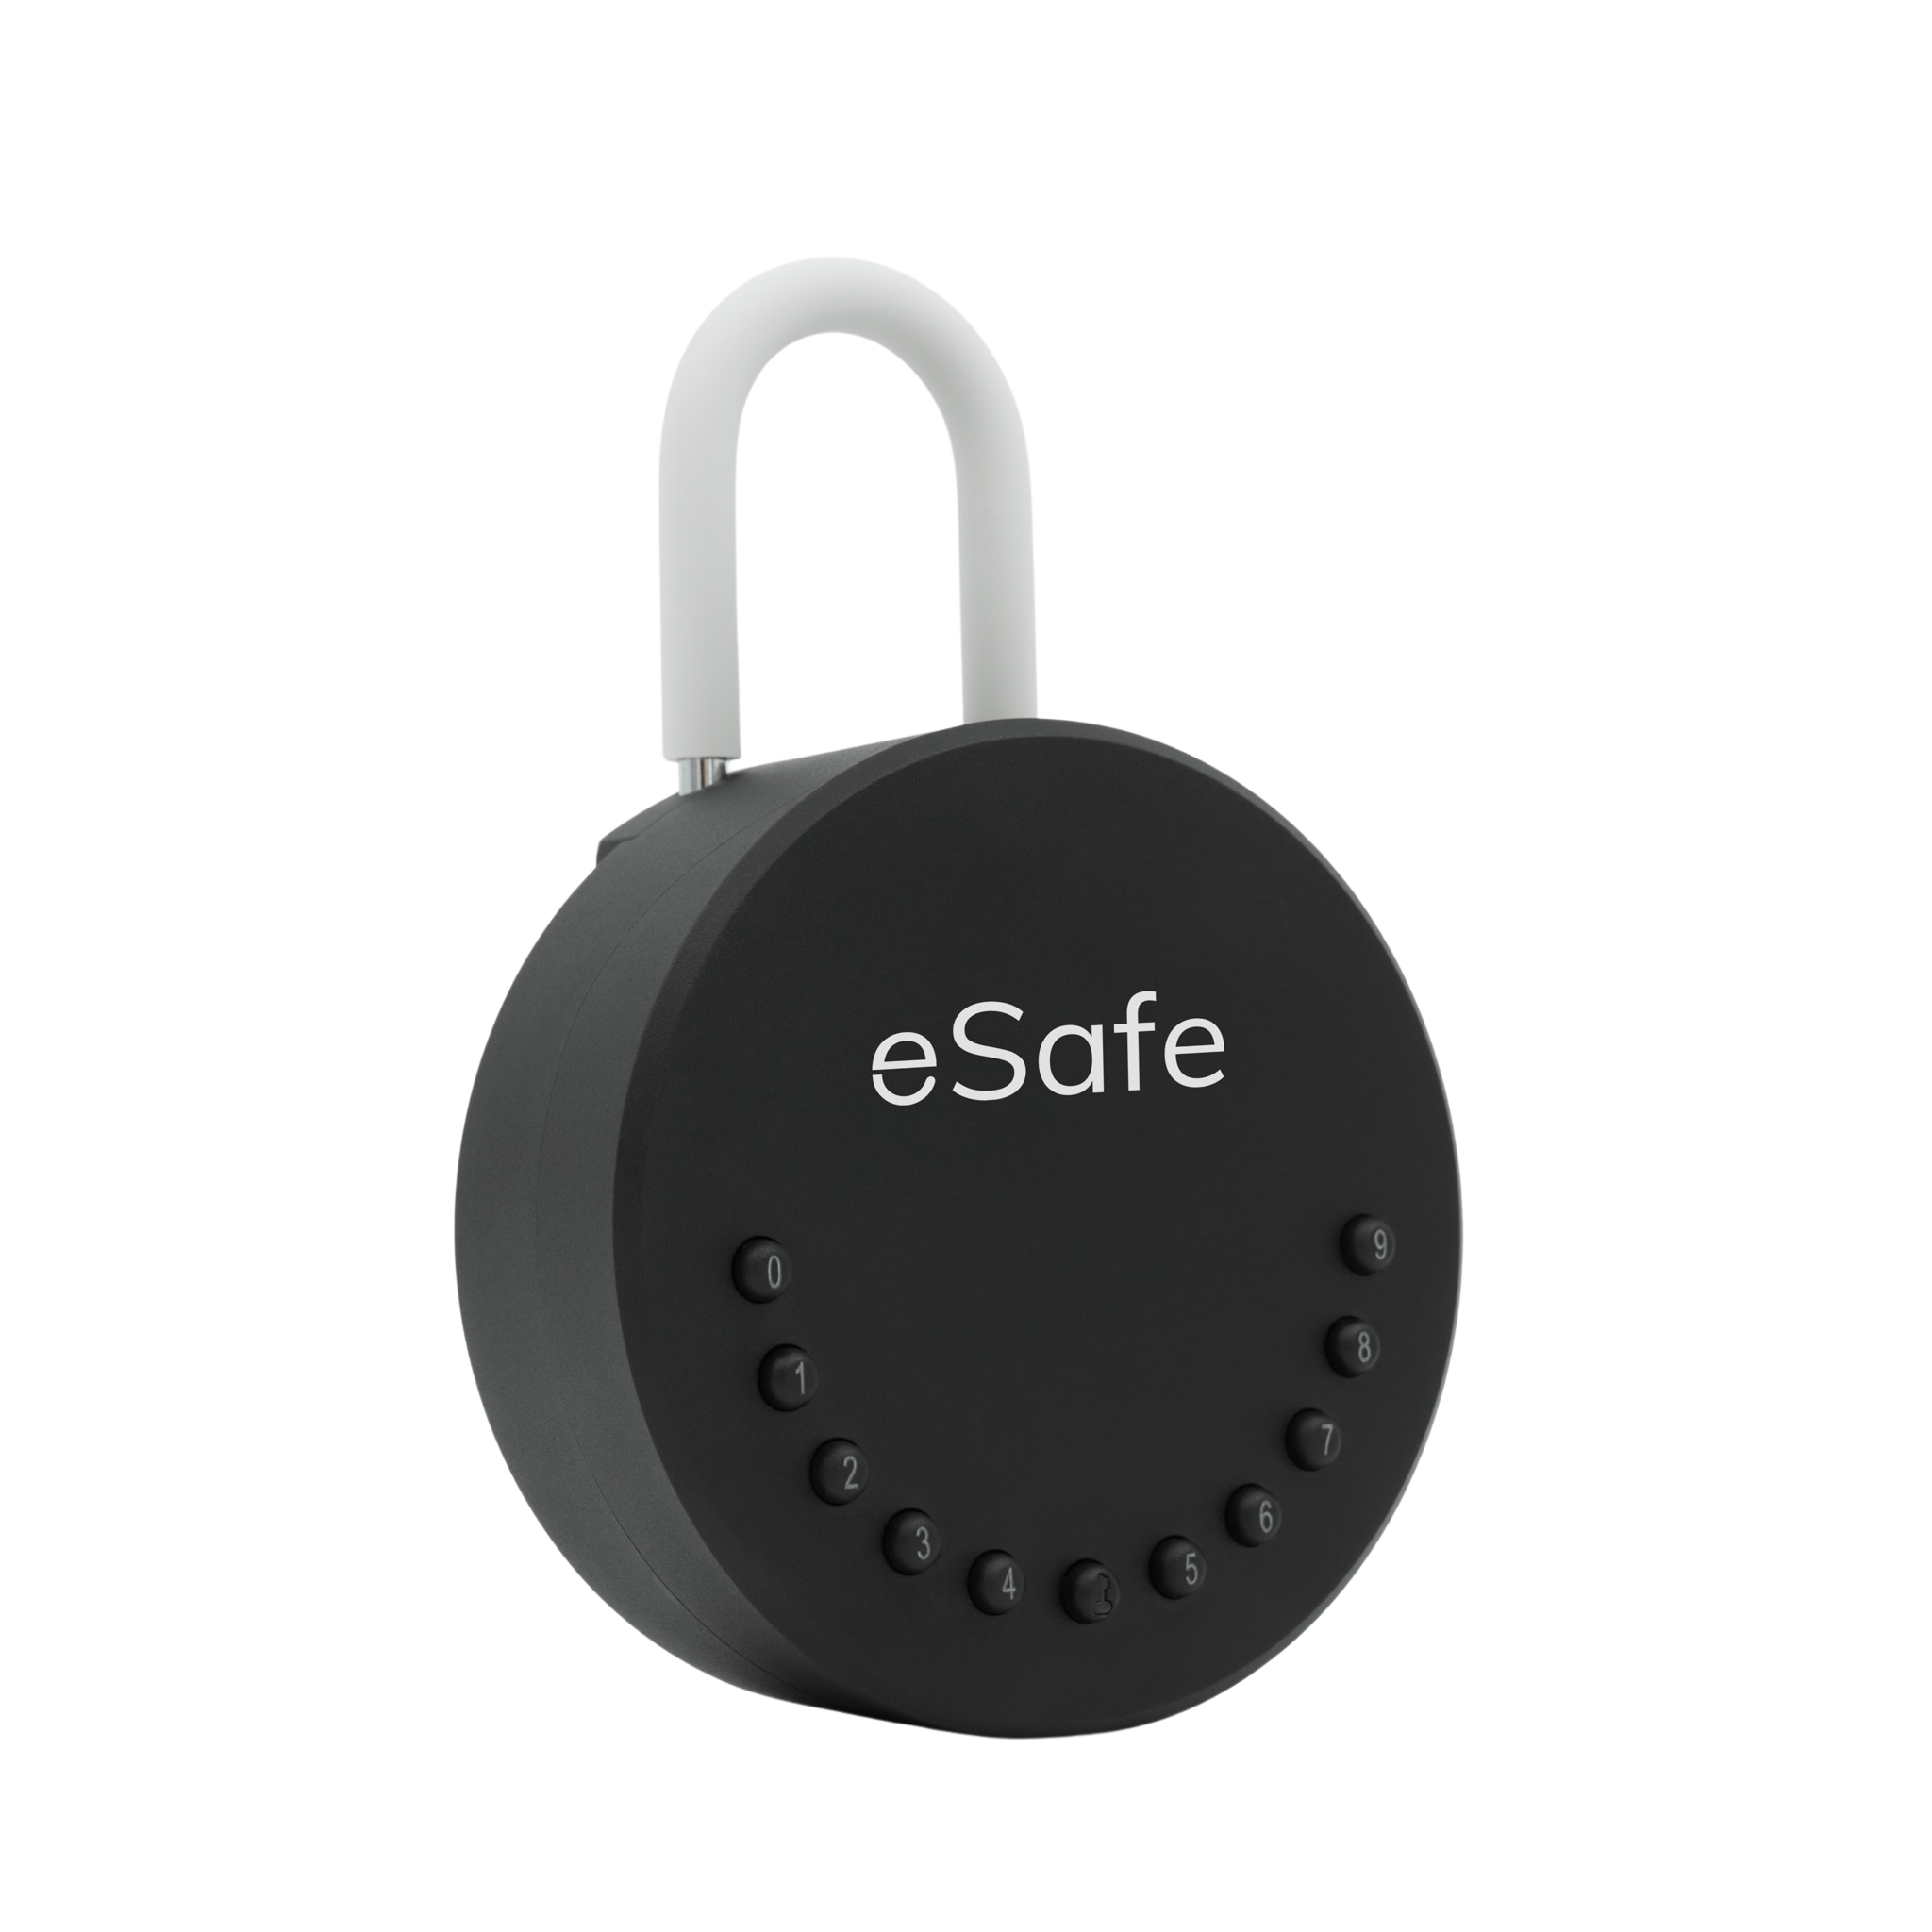 eSafe shackle attached to round eSafe key box for temporary storage